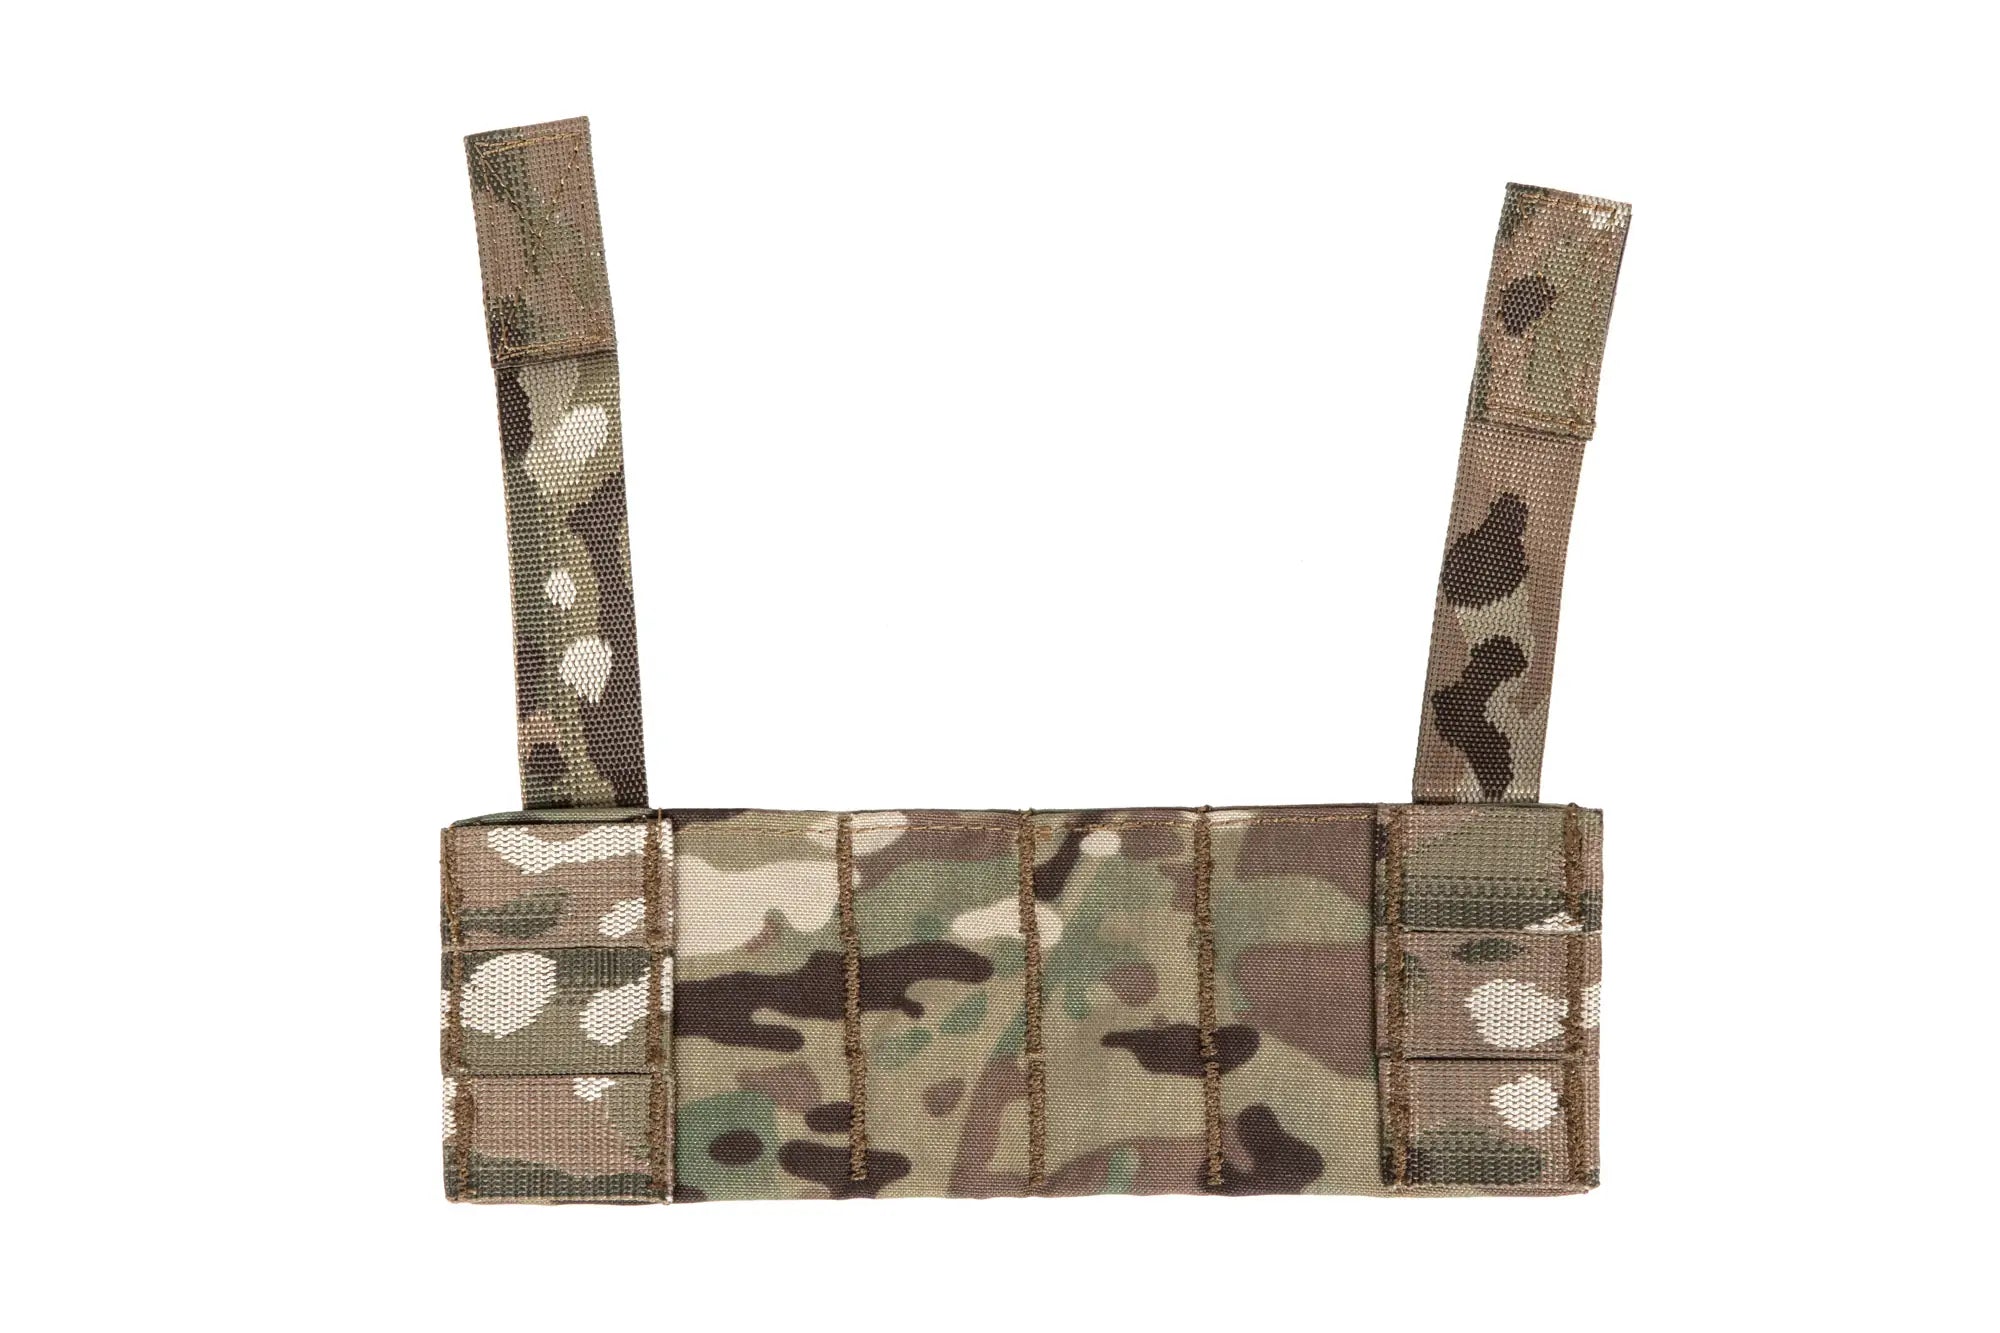 Additional Molle panel for Chest Rig waistcoats Wosport Multicam-1